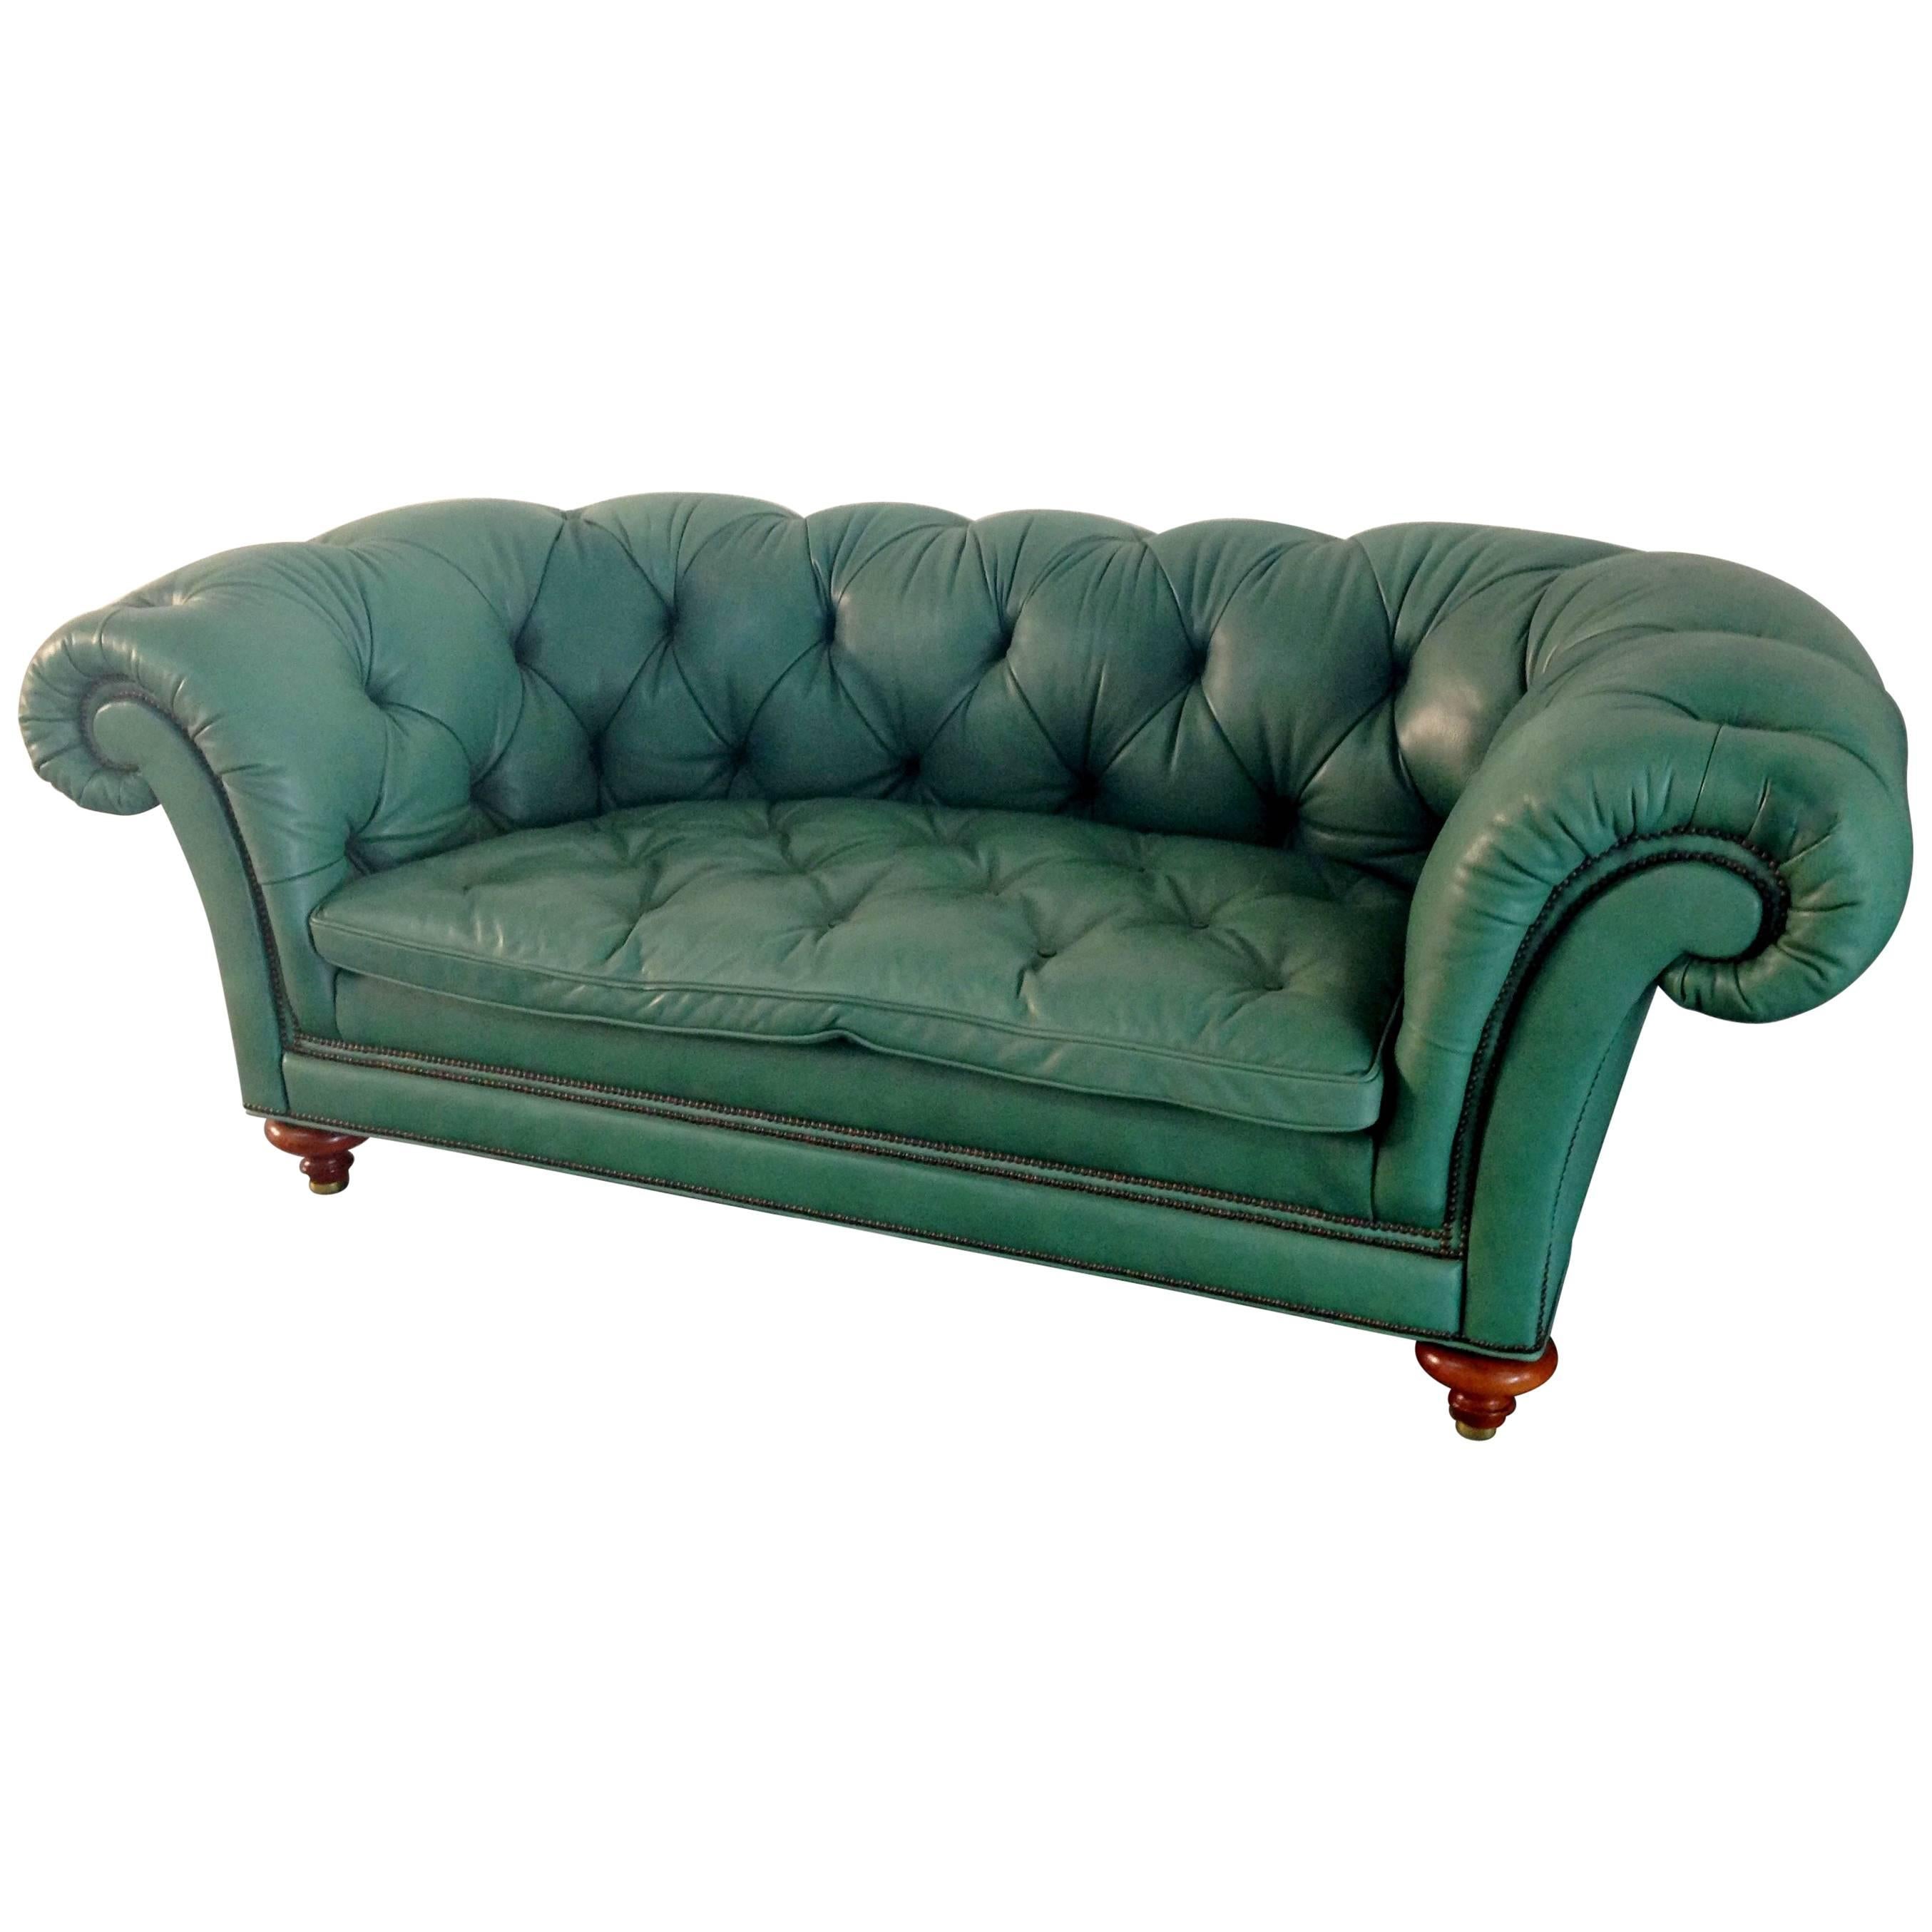 English Green Vintage Leather Chesterfied Sofa